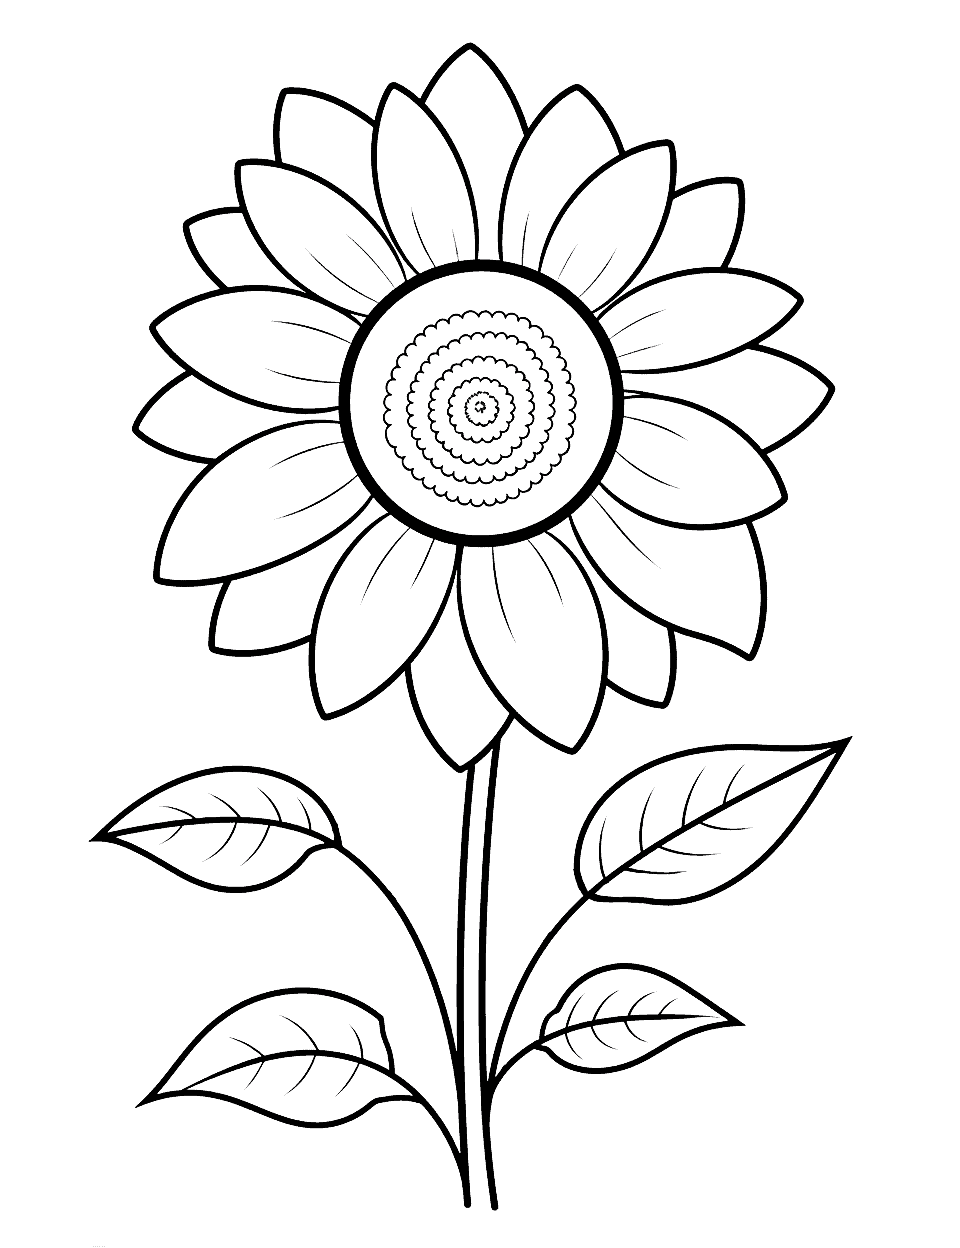 Simple Sunflower Flower Coloring Page - A large, easy-to-color sunflower page for preschool kids.